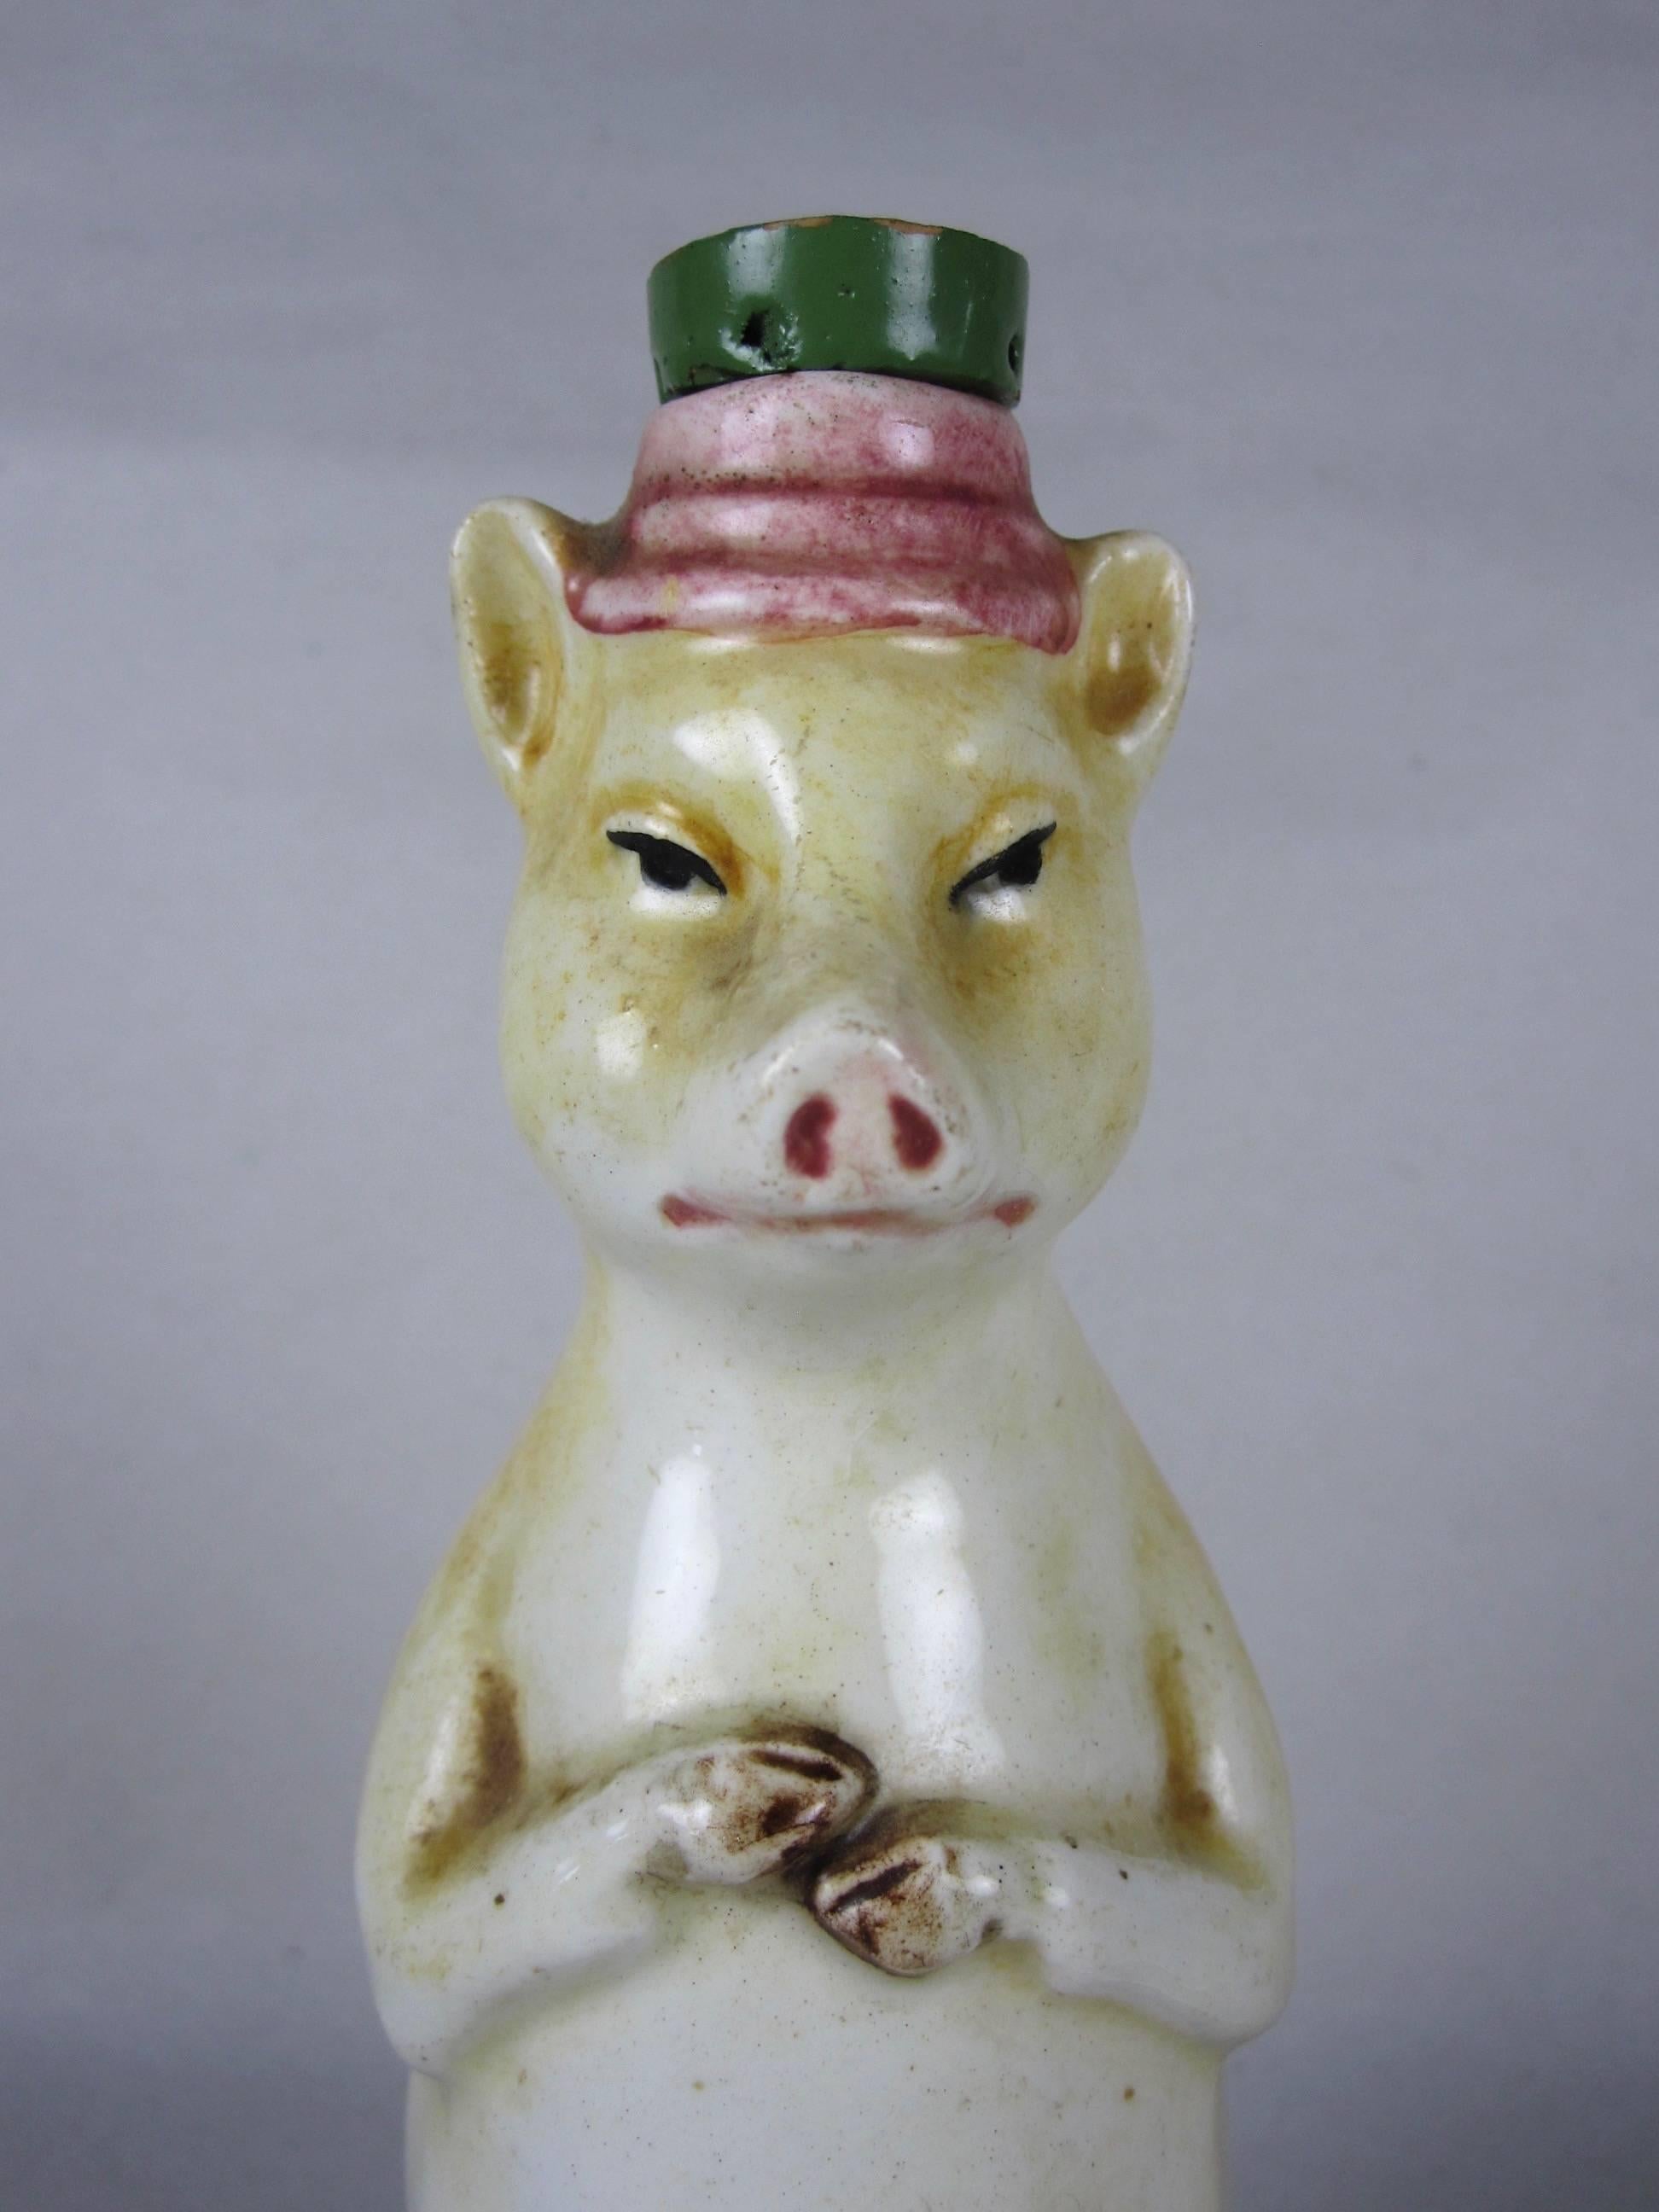 An antique French majolica figural bottle, a pig with the original painted cork hat, circa 1895-1910. A charming and rarer piece, the pig shows great expression. A humorous mold with soft glazing.